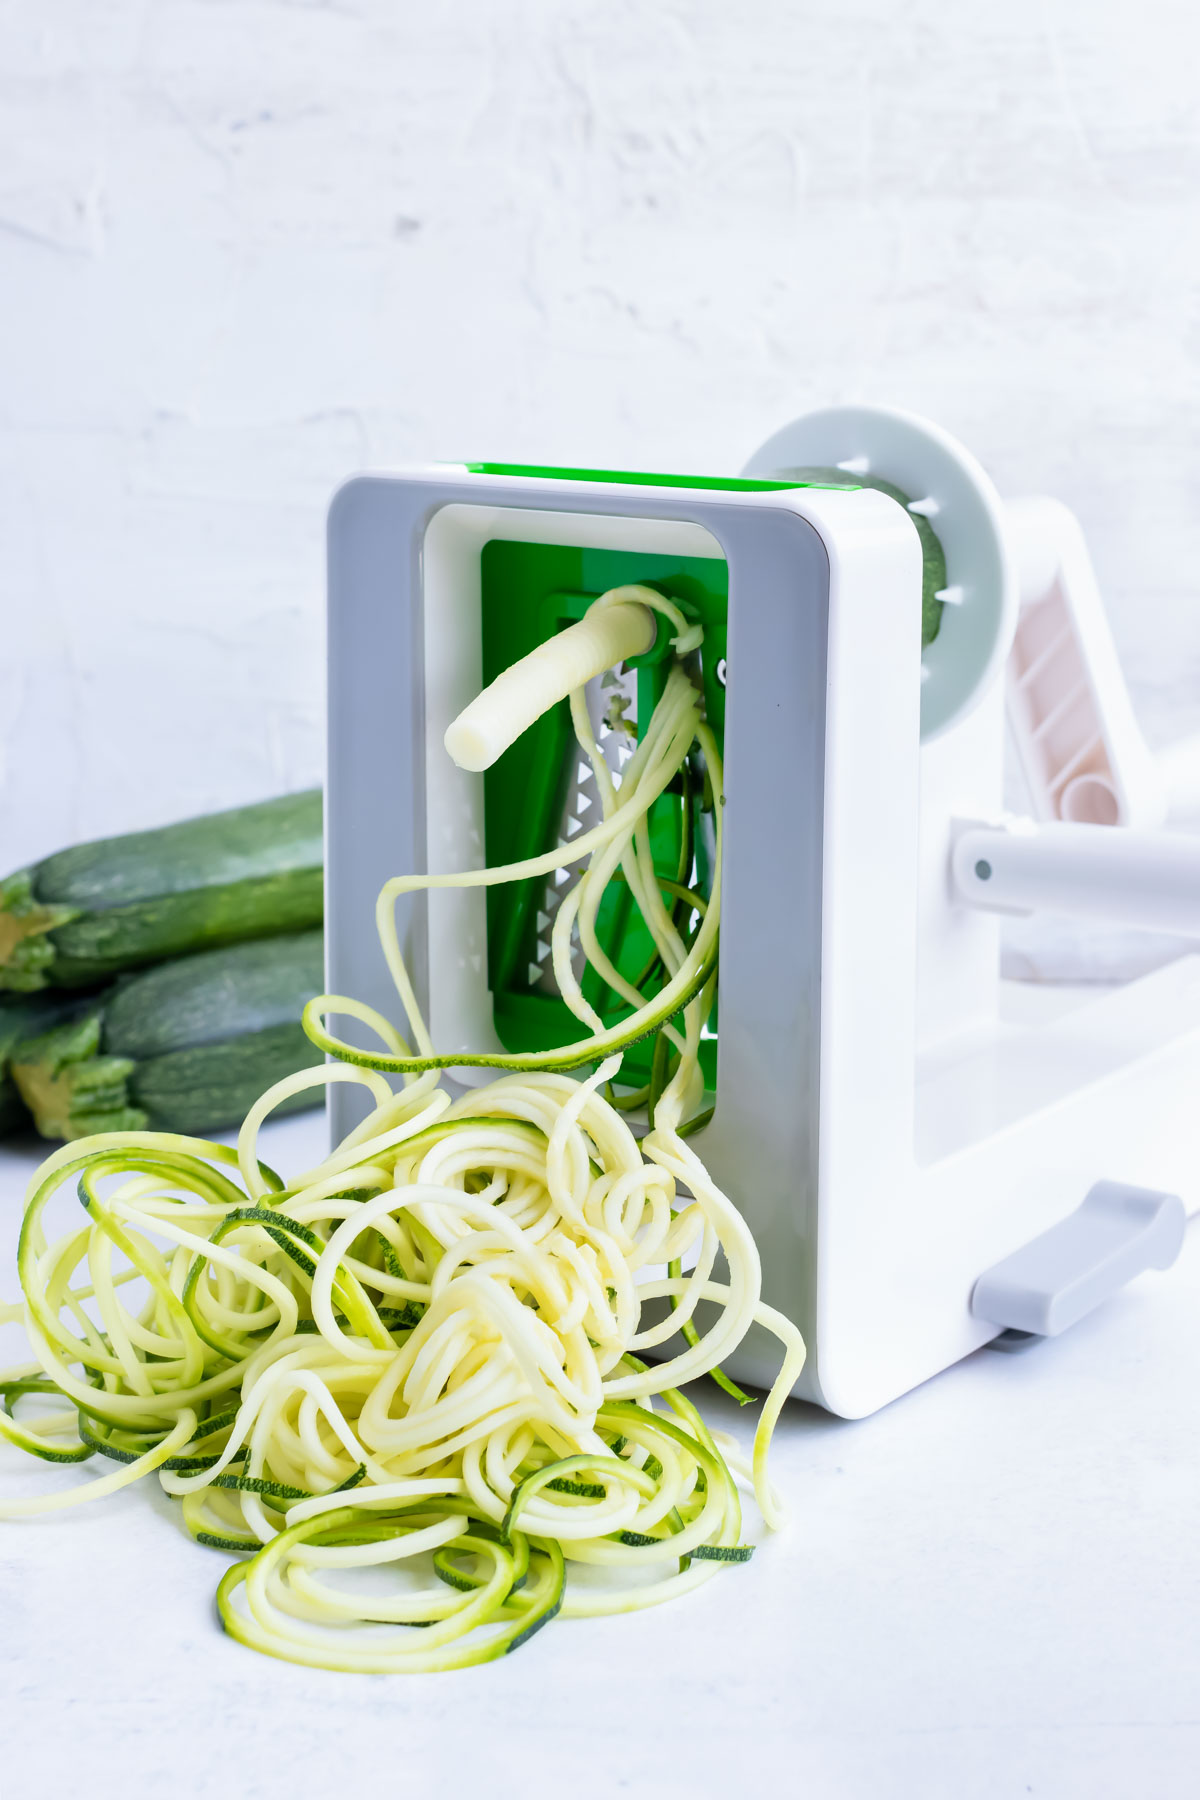 How to use a spiralizer to grate zucchini into zucchini noodles as a pasta alternative.